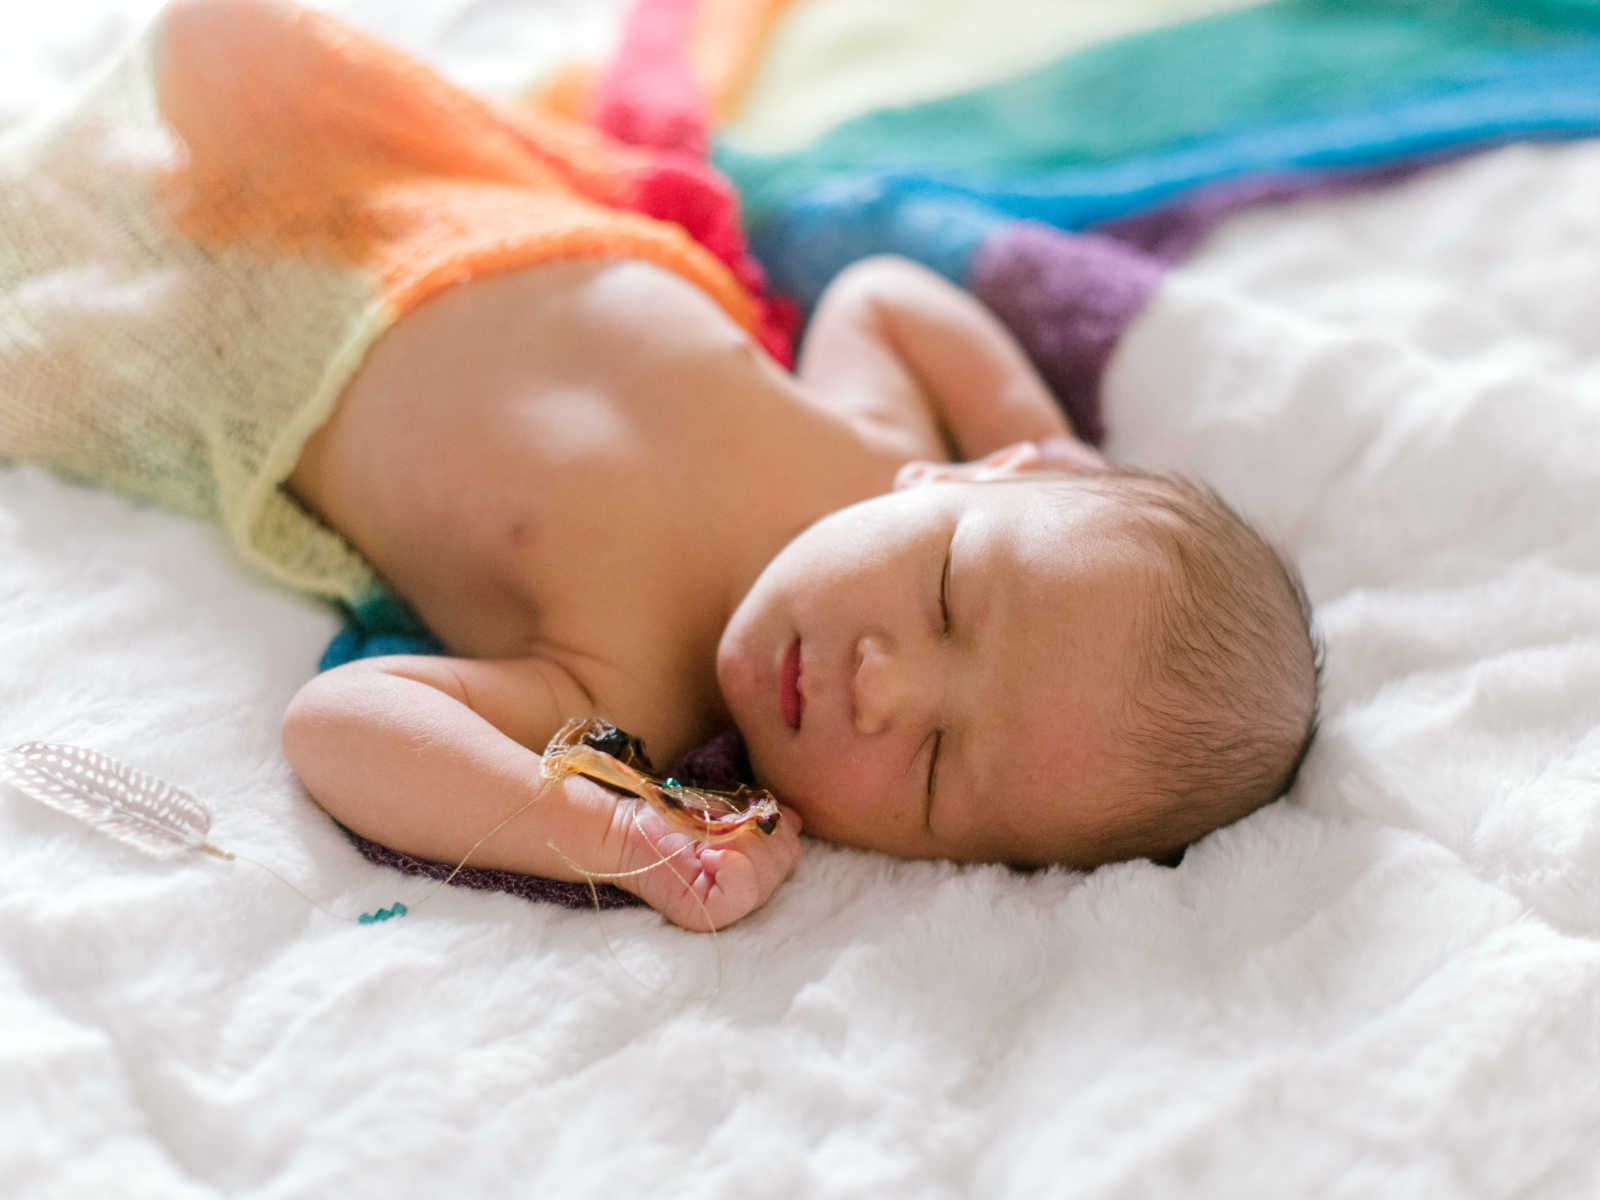 baby sleeping on a blanket that looks like a rainbow with toy in hand